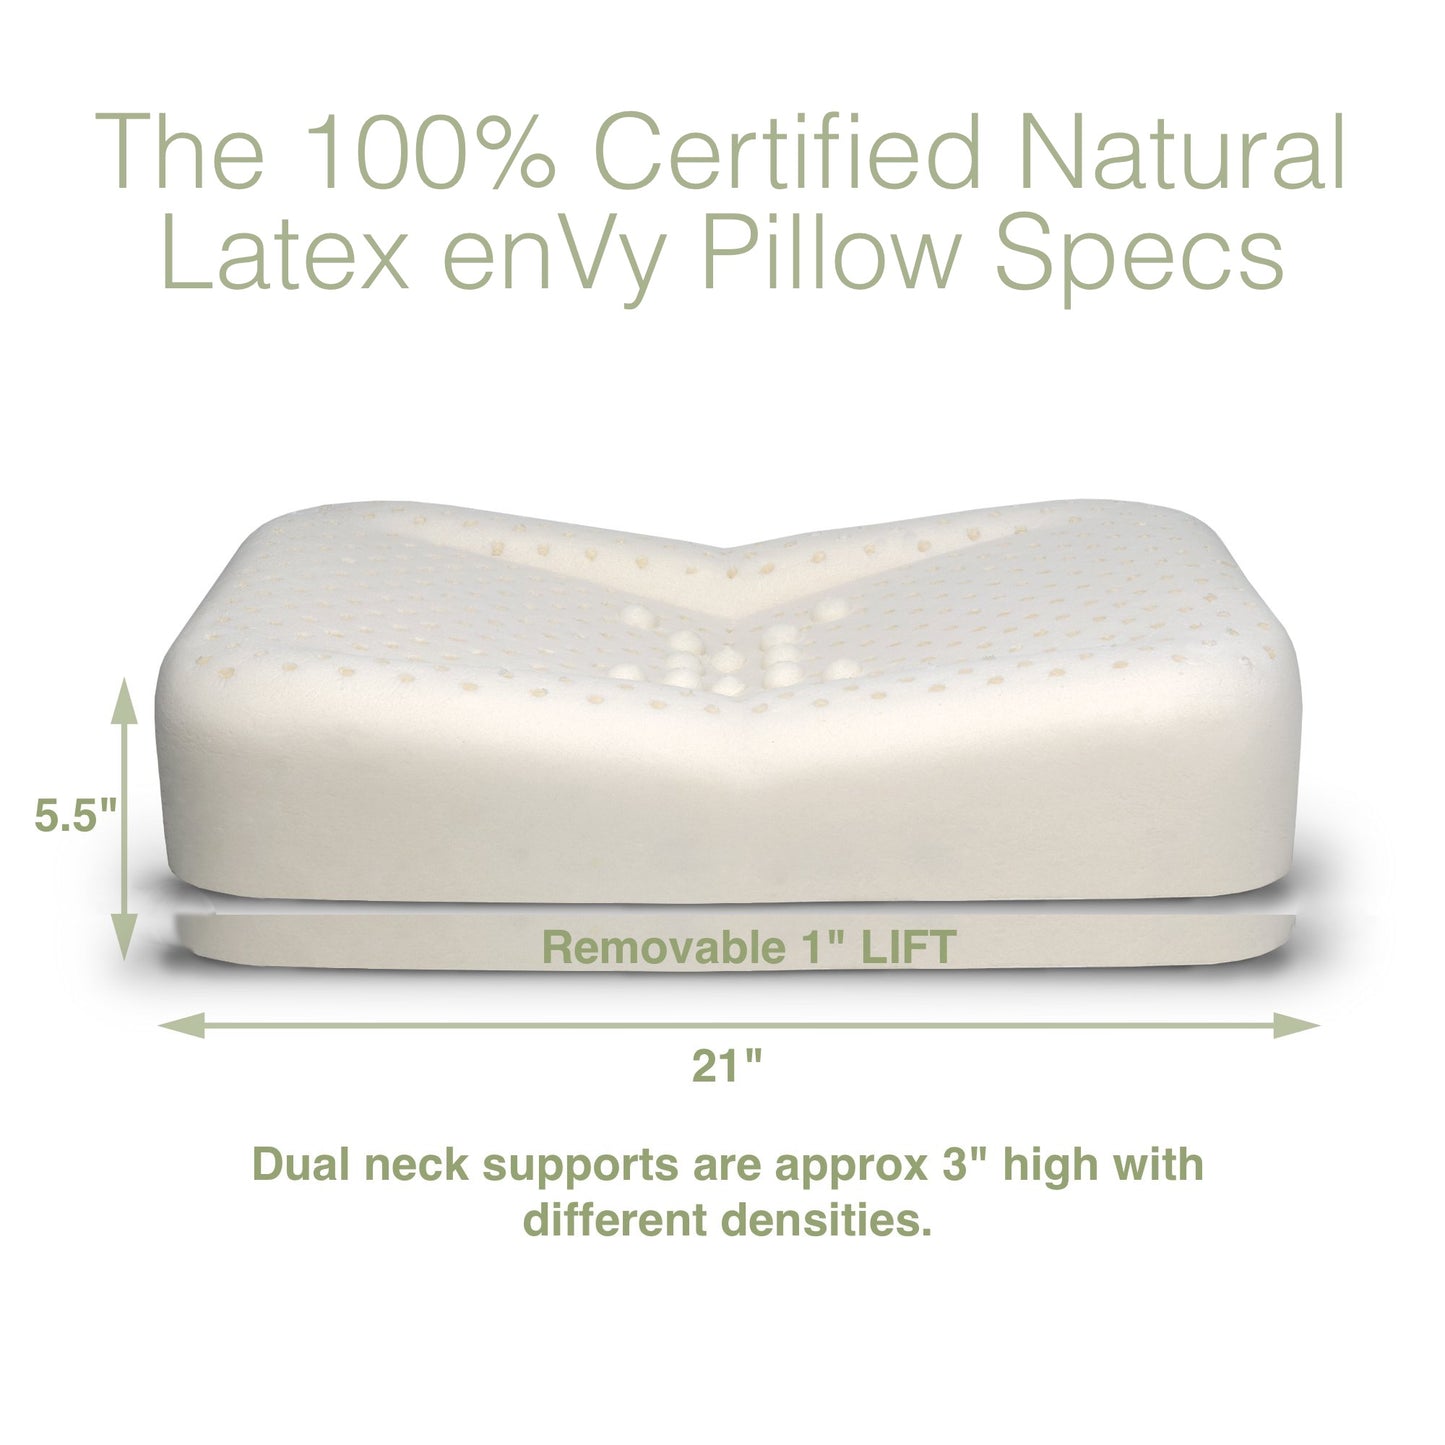 The enVy® COPPER + TENCEL™ Anti-Aging Pillow - 100% Natural Latex Pillow with a COPPER-infused Certified Botanical TENCEL™ Pillowcase